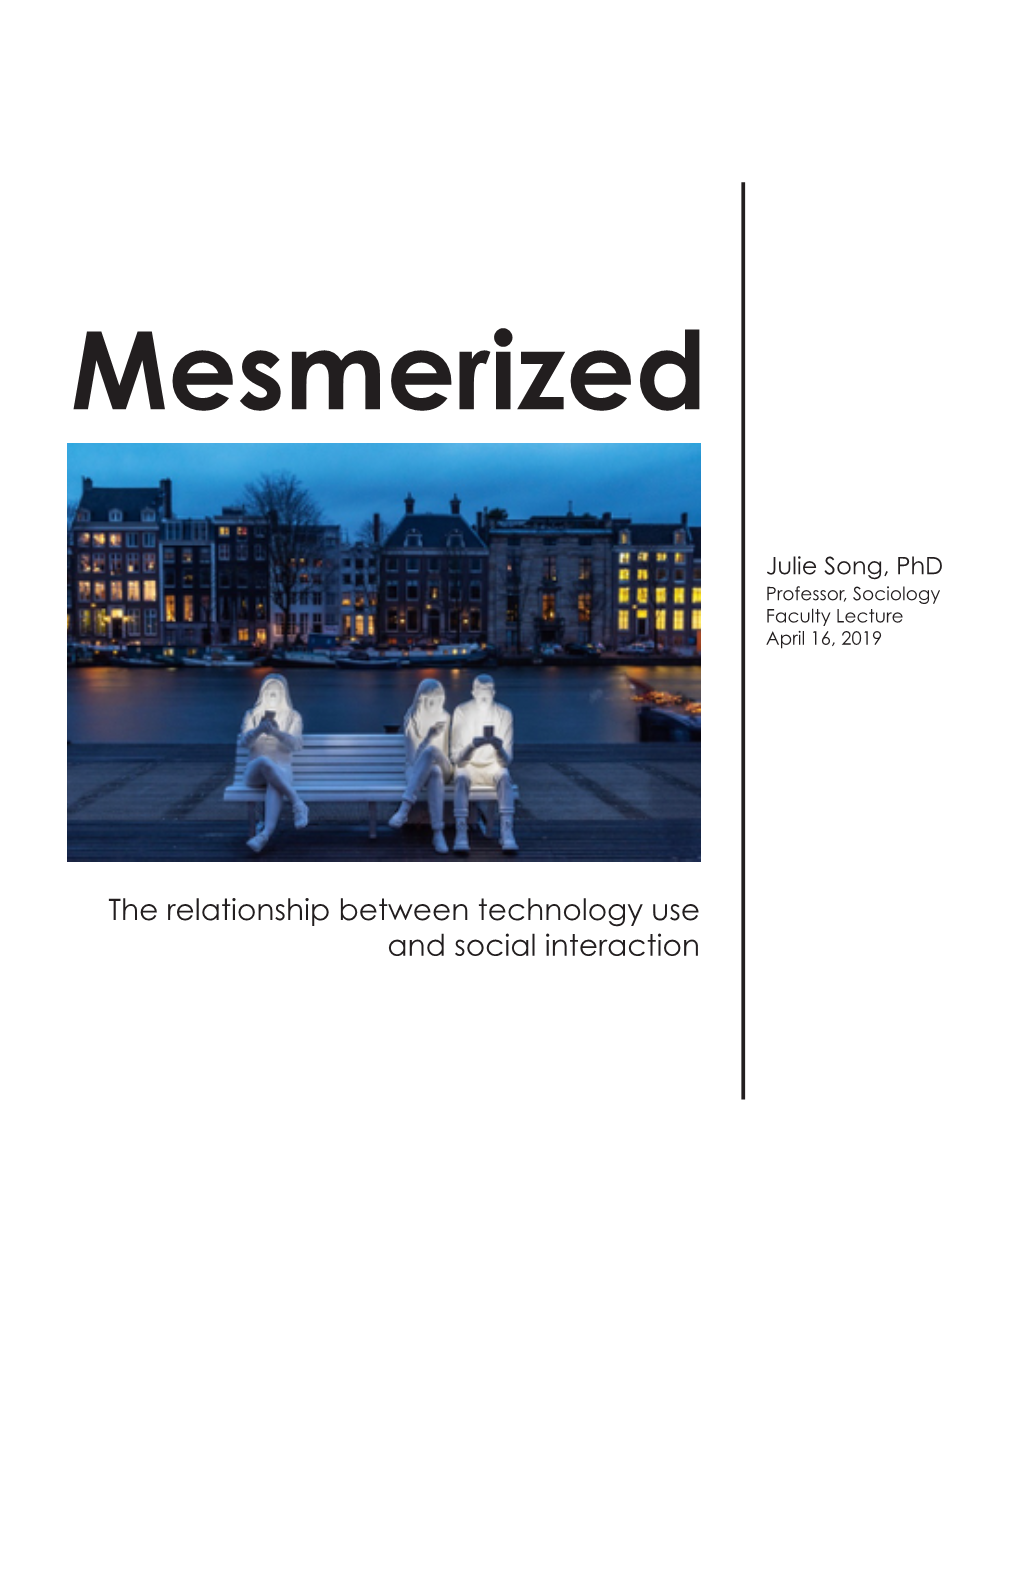 The Relationship Between Technology Use and Social Interaction the Cover Image Is a Photo Taken by Richard Rigby